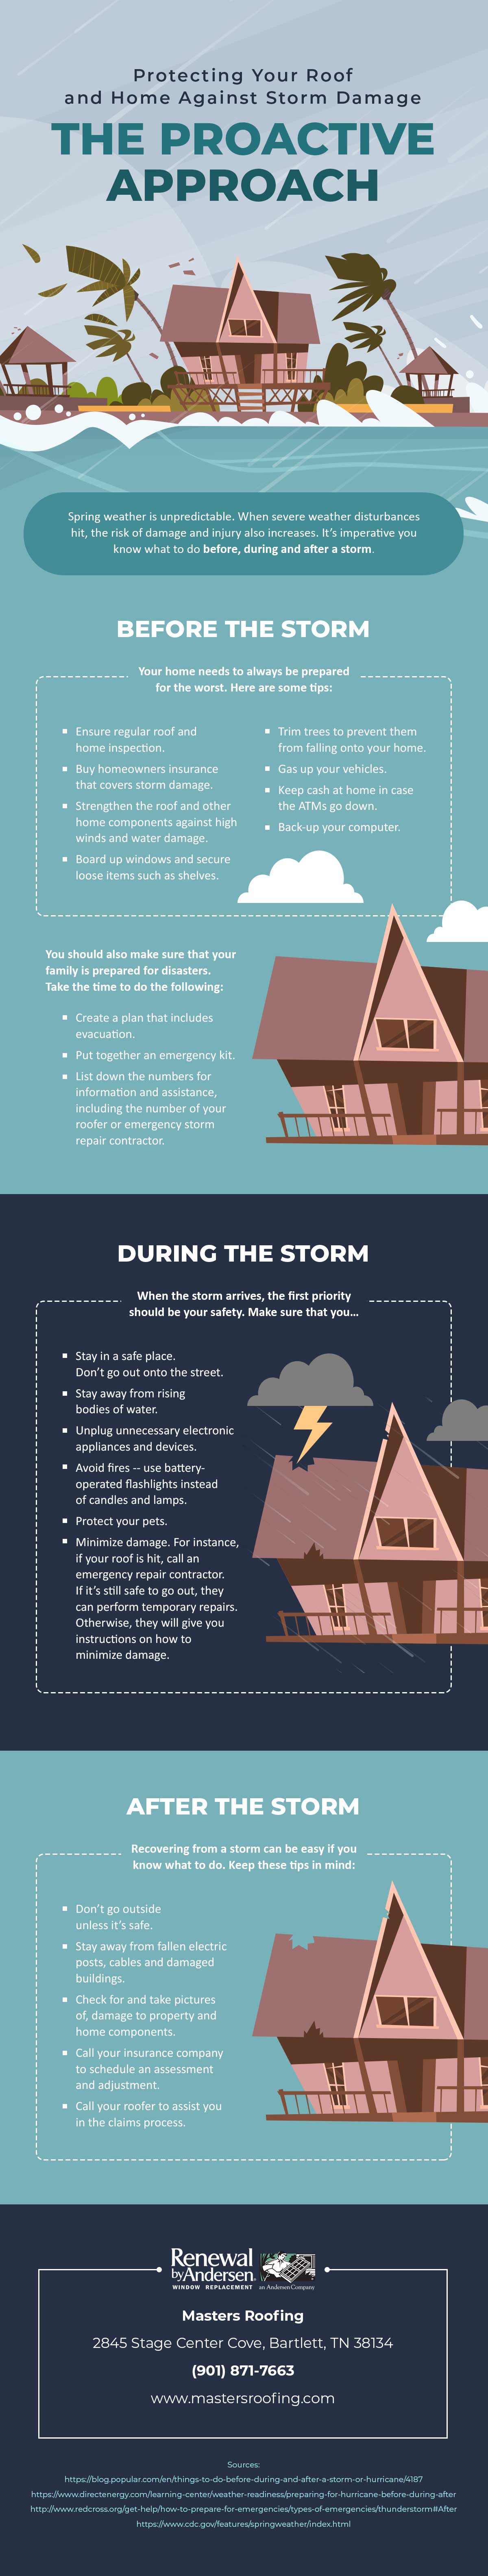 Infographic: Protecting Your Roof and Home Against Storm Damage The Proactive Approach